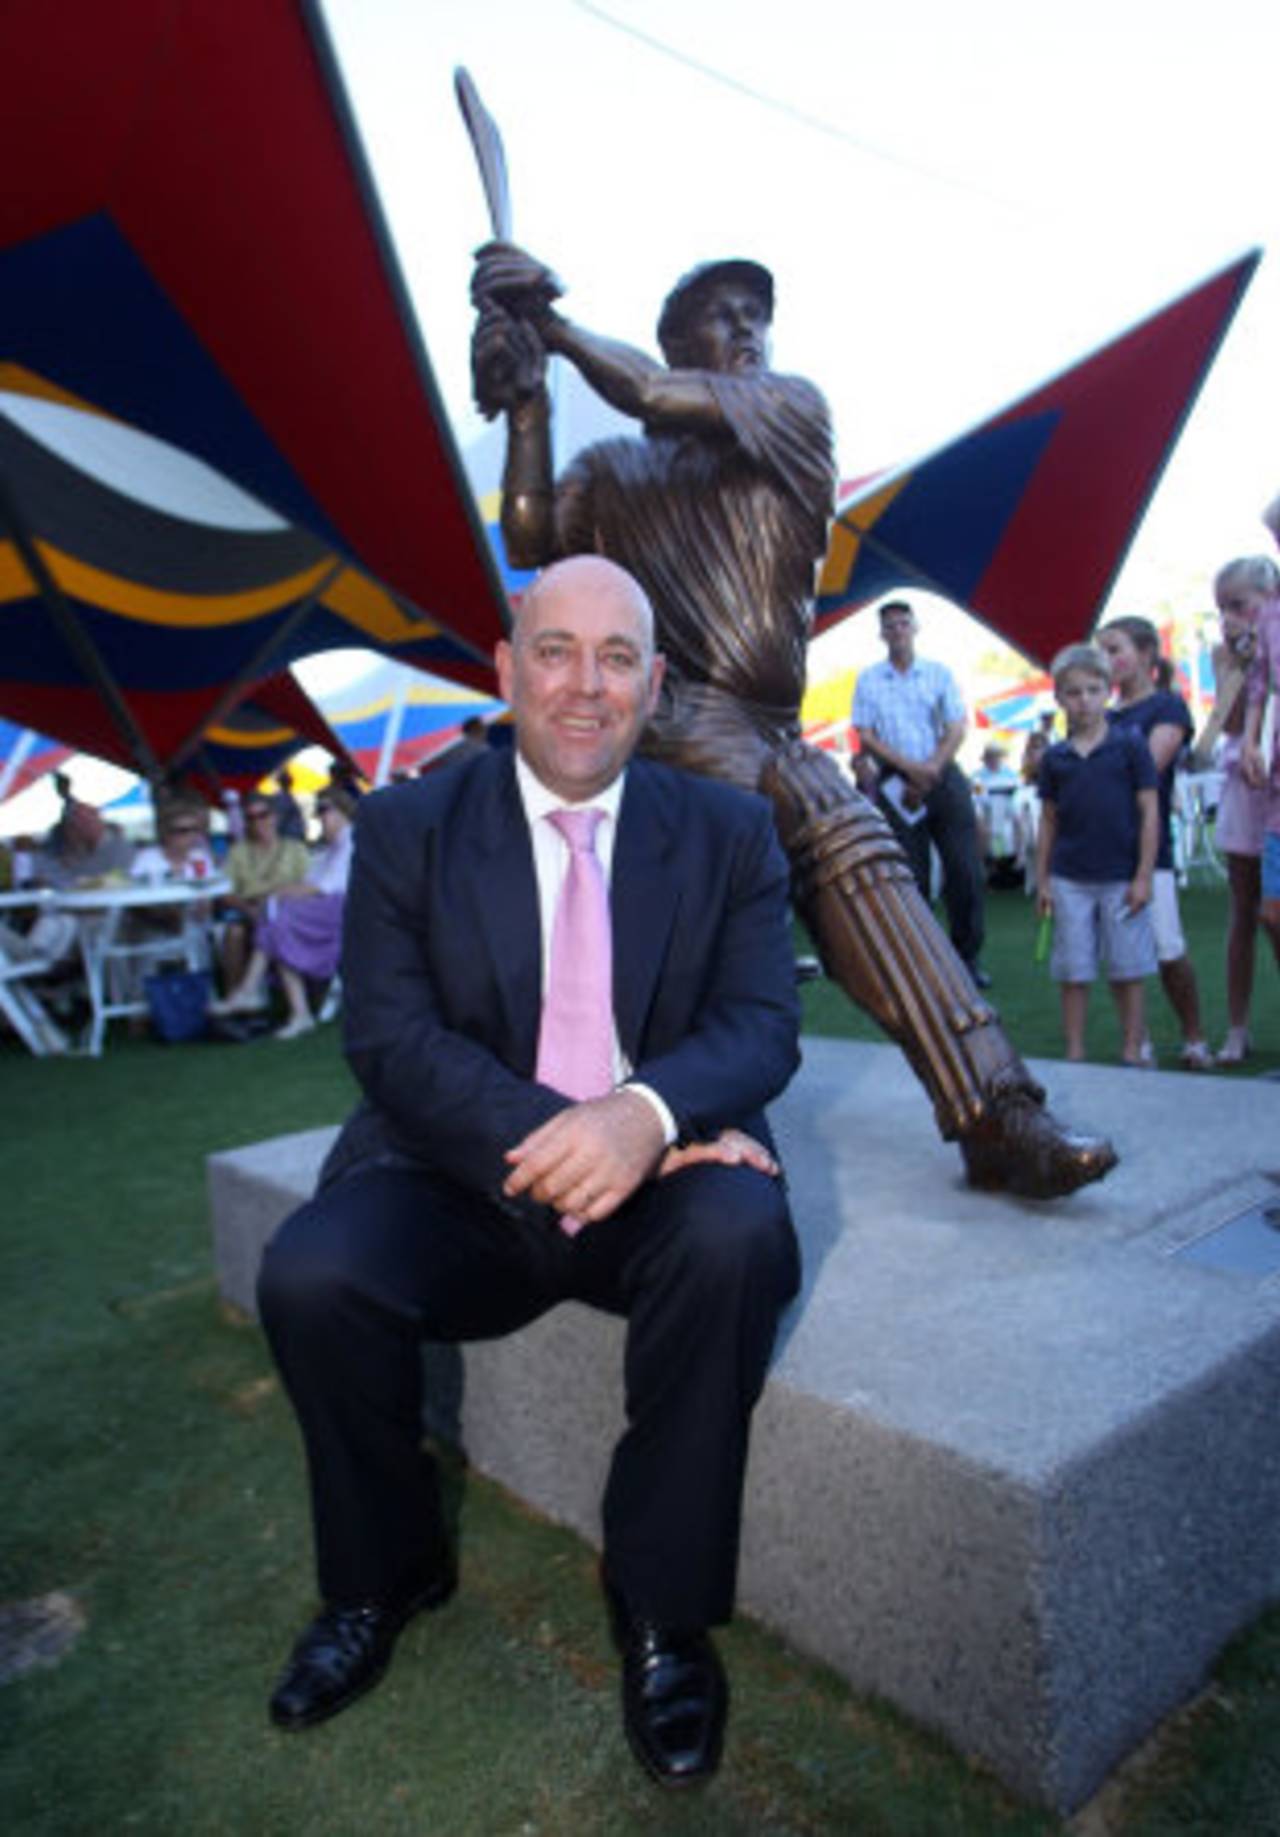 Darren Lehmann sits in front of a statue of himself which was unveiled before the second day's play, Australia v India, 4th Test, Adelaide, 2nd day, January 25, 2012